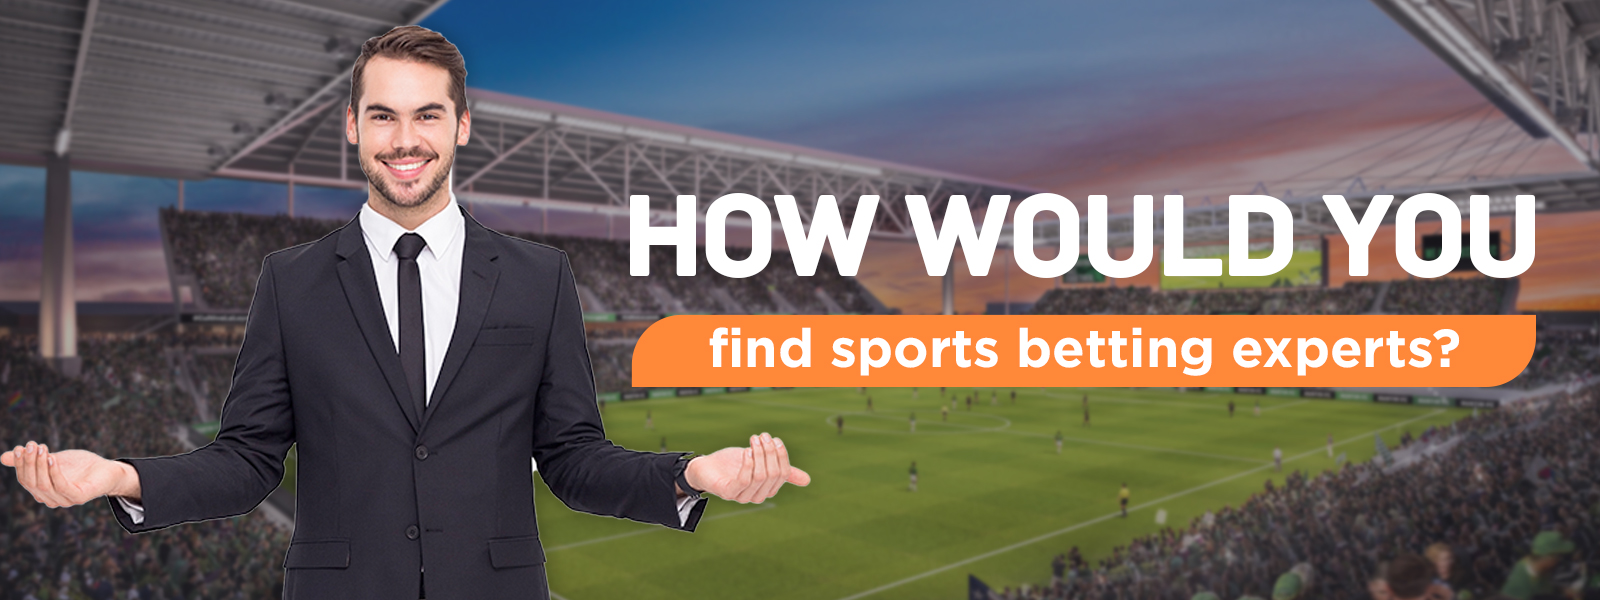 Finding Sports Betting Experts